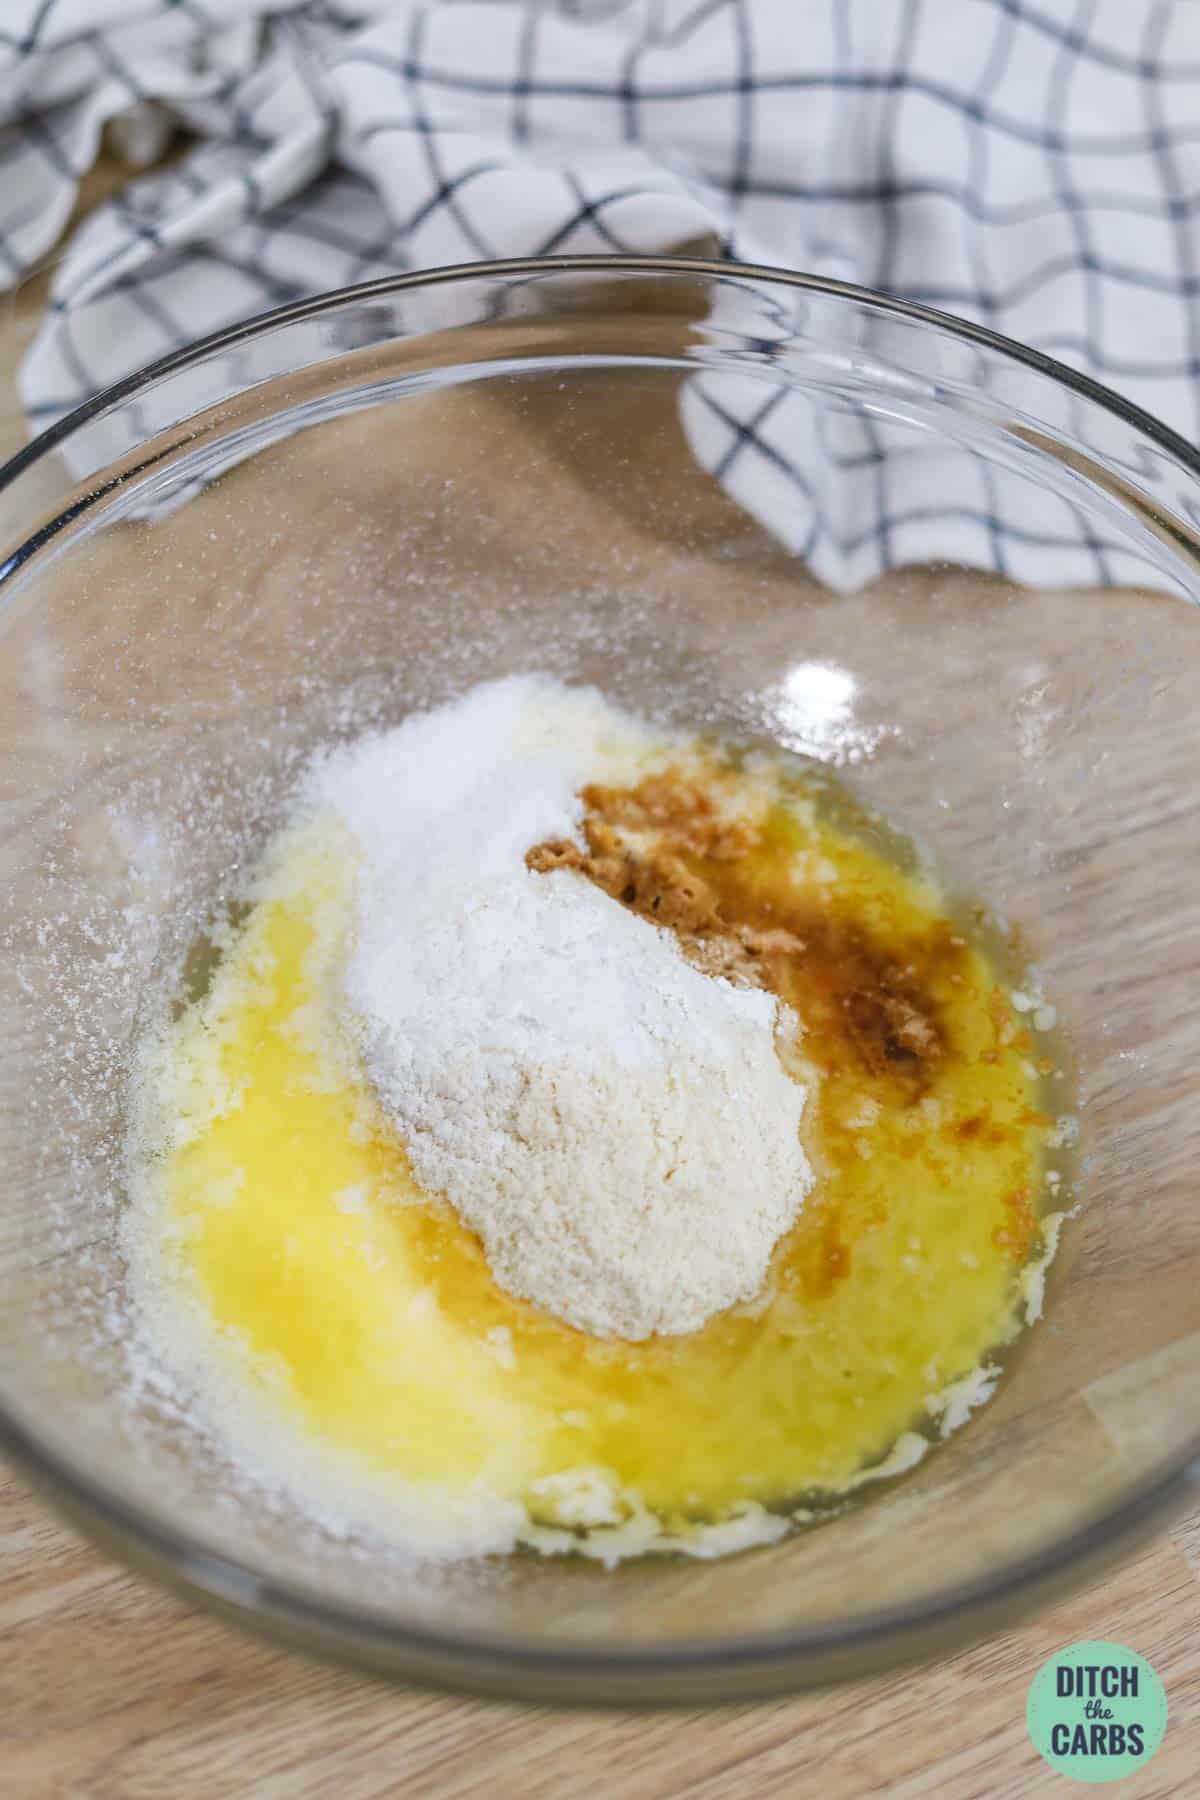 dry ingredients to make a coconut flour cake